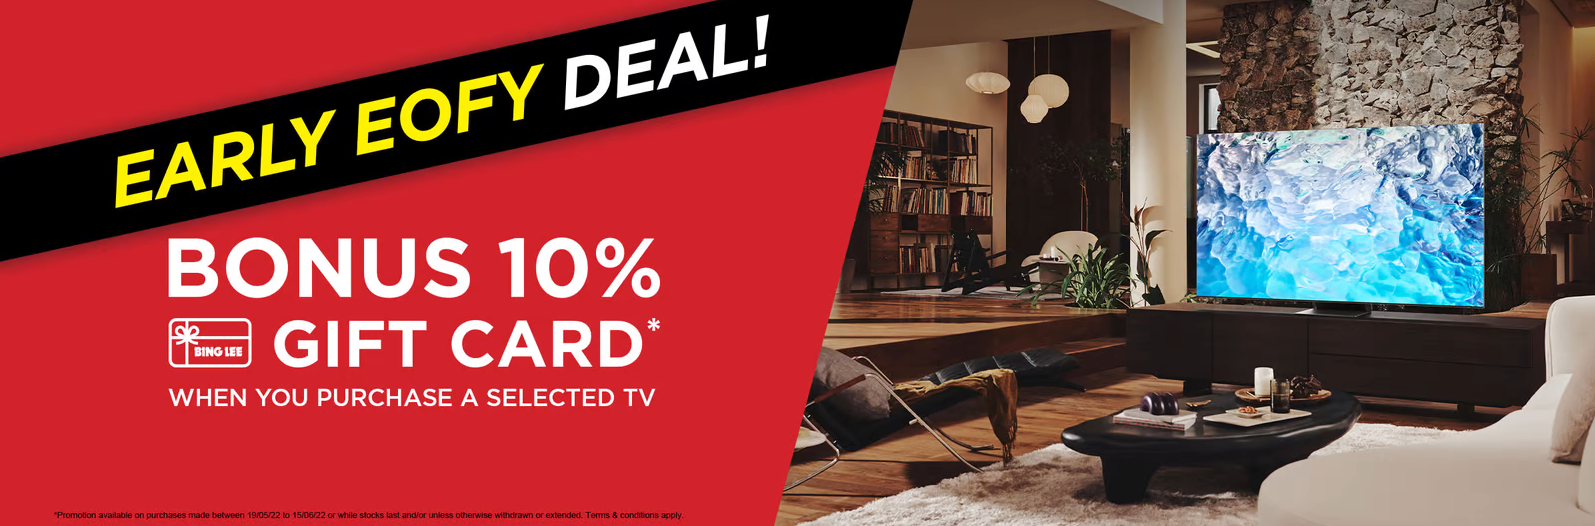 Bonus 10% gift card when you purchase a selected tv at Bing Lee